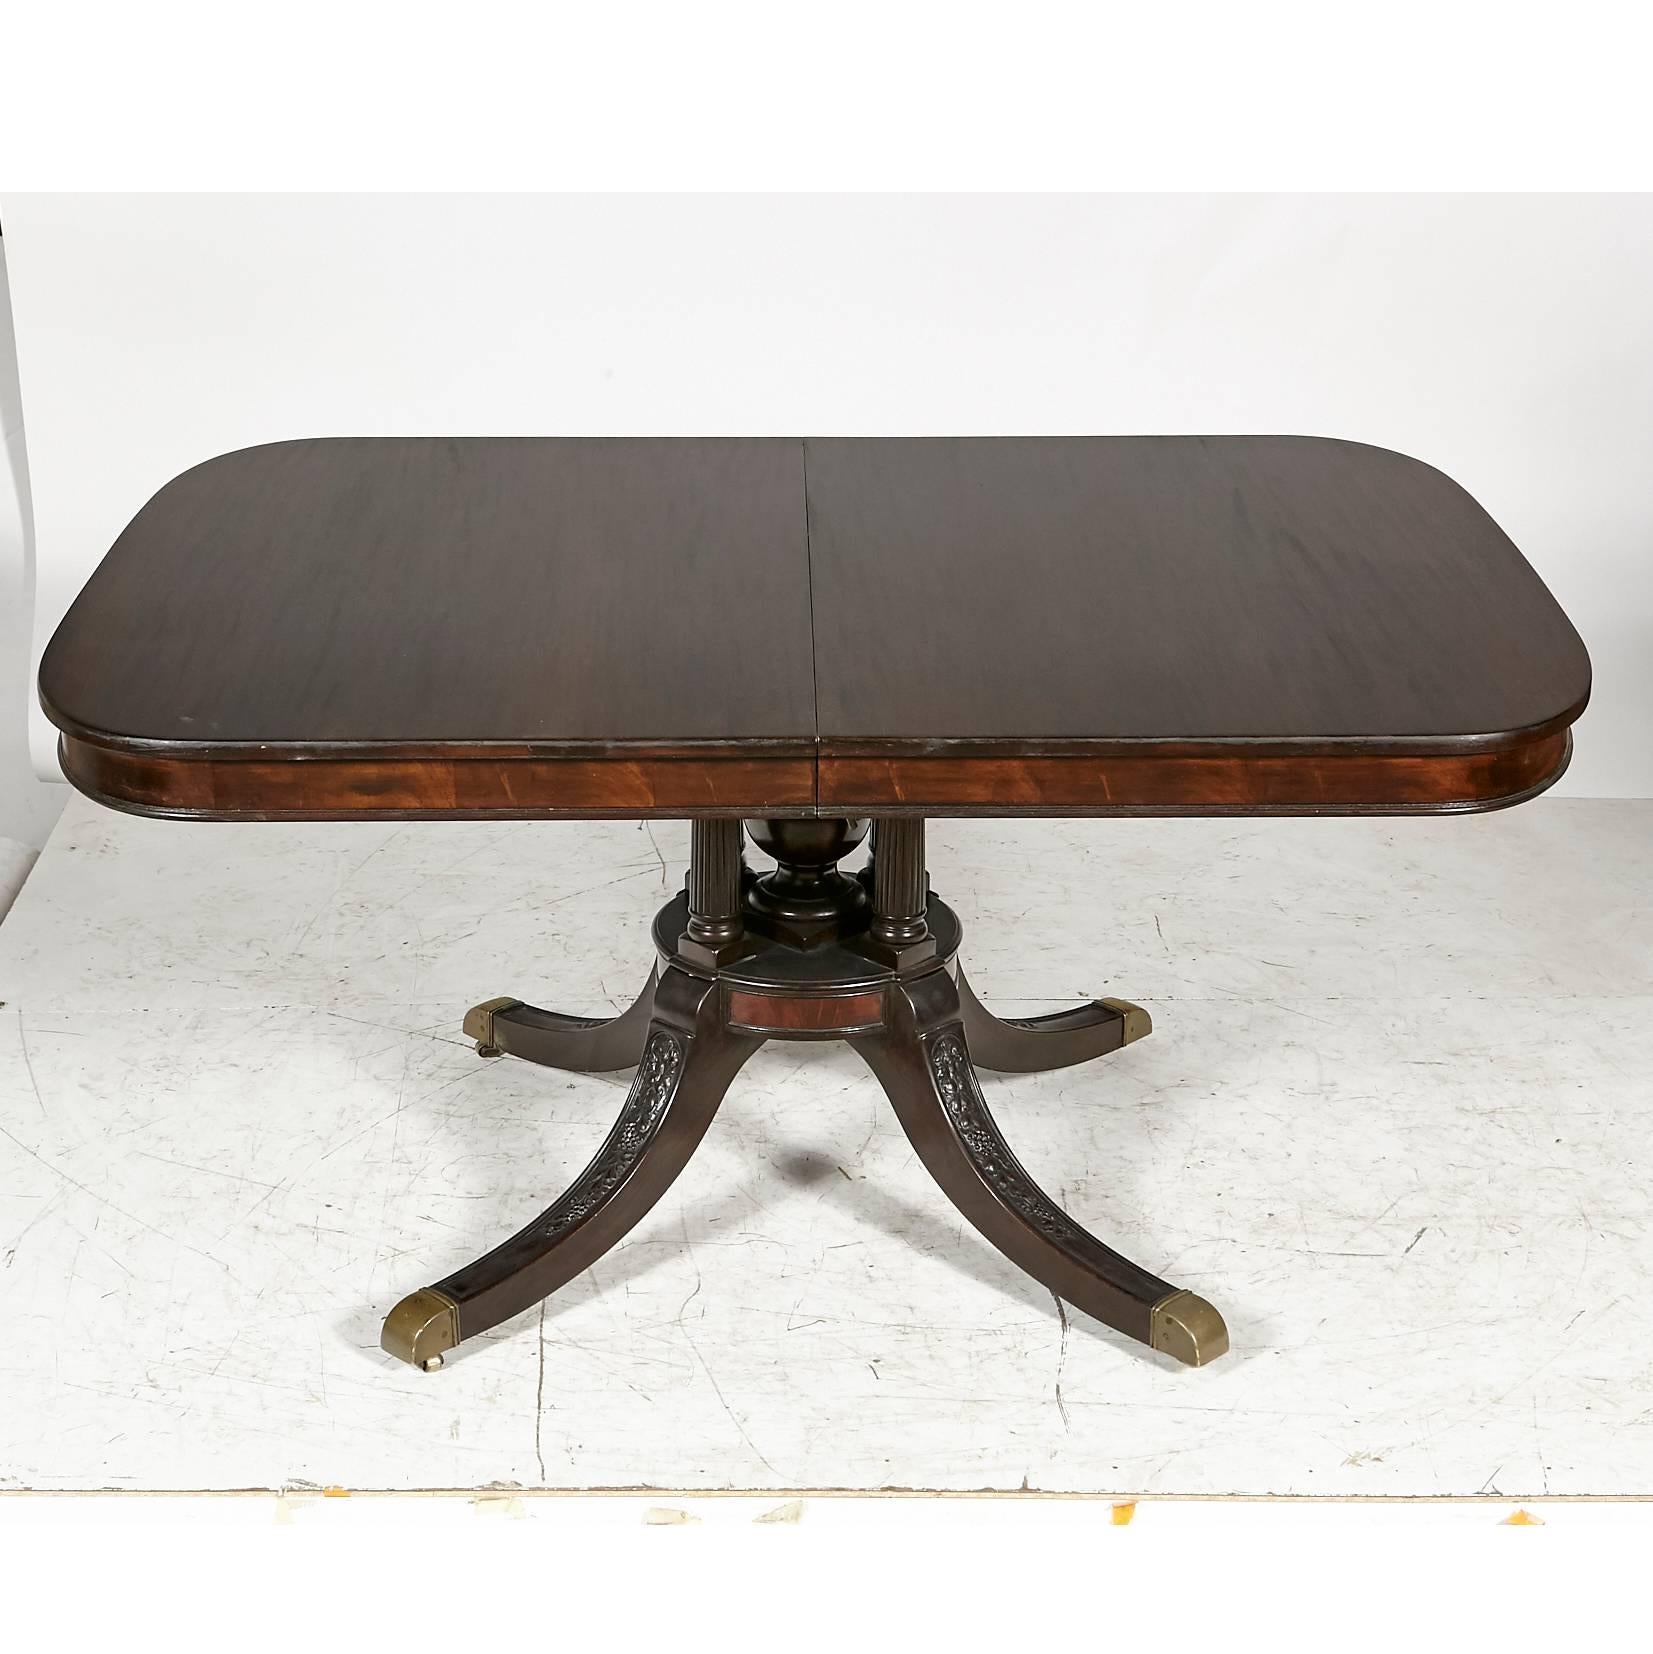 Regency-style mahogany wood banquet dining room table with five additional boards. The base has four columns and hand-carved fruit all accented with brass feet. When the table is fully open there are four legs that pull down to support the table